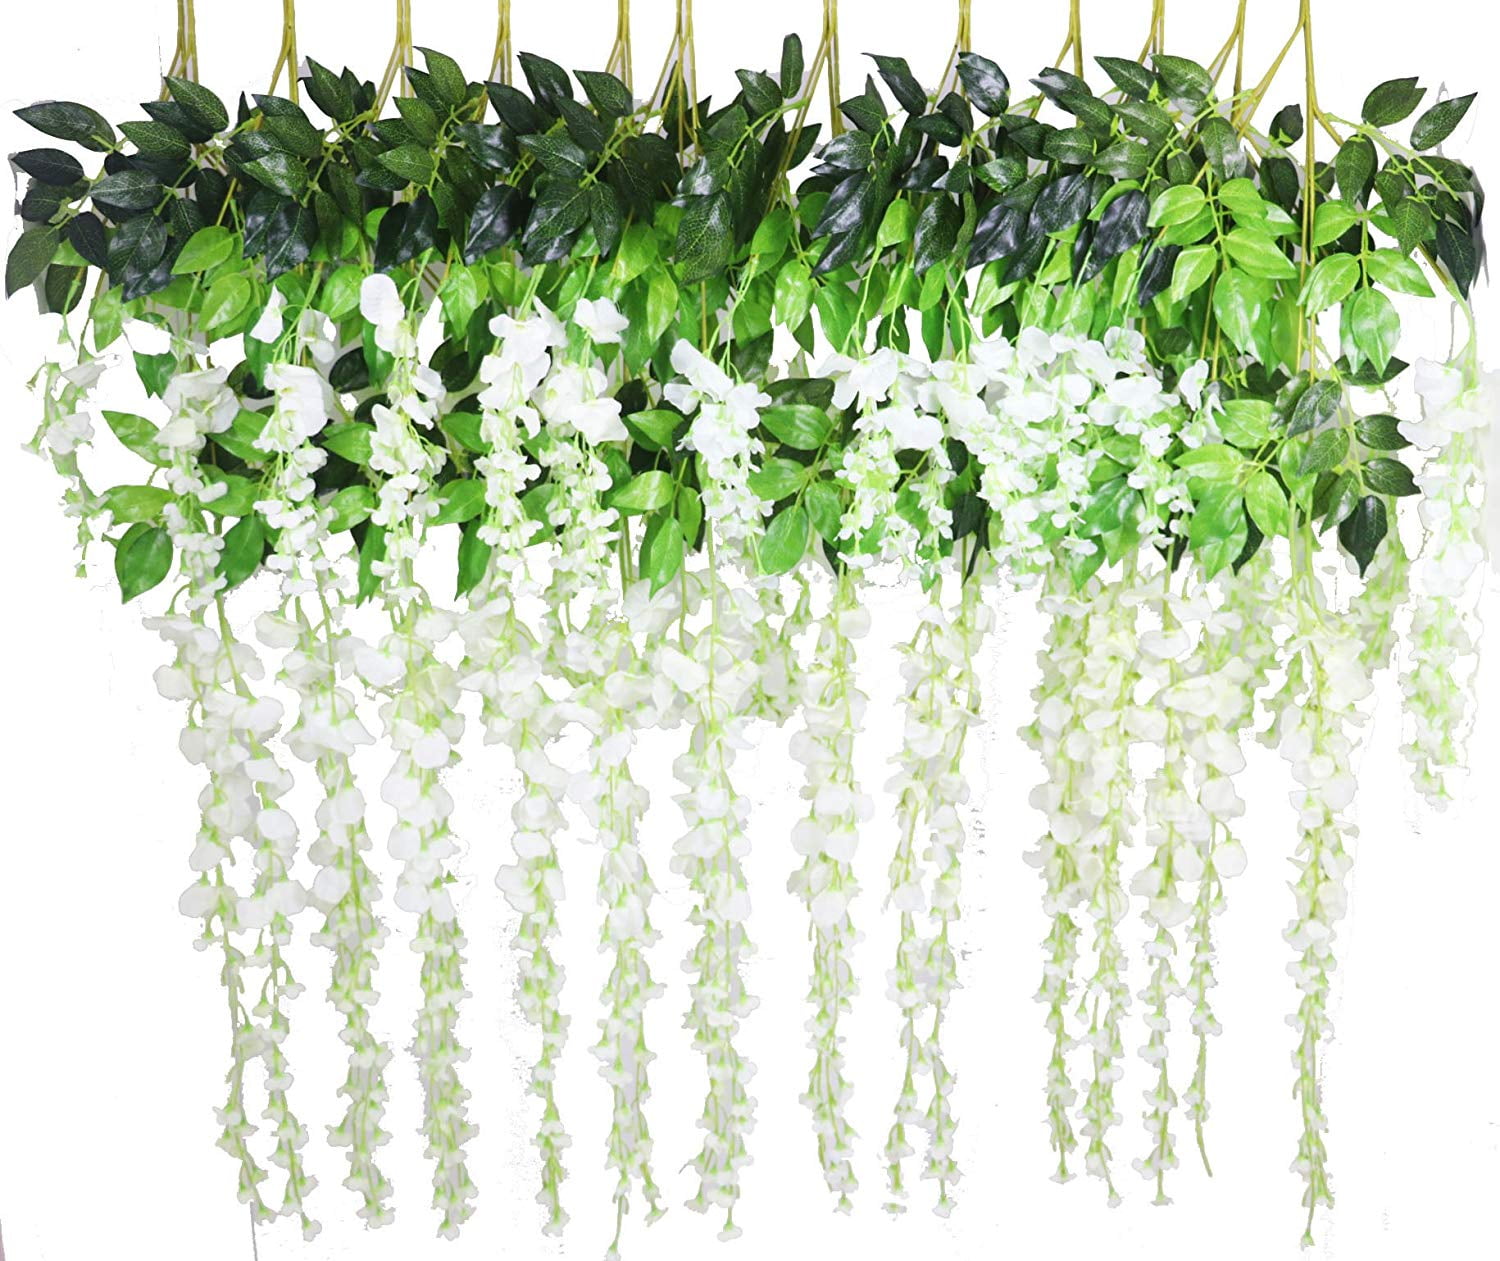 White DearHouse 12Pack 3.6 Feet/Piece Artificial Wisteria Vine Garland Hanging Wisteria Garland Silk Flowers String for Home Party Garden Wedding Decor